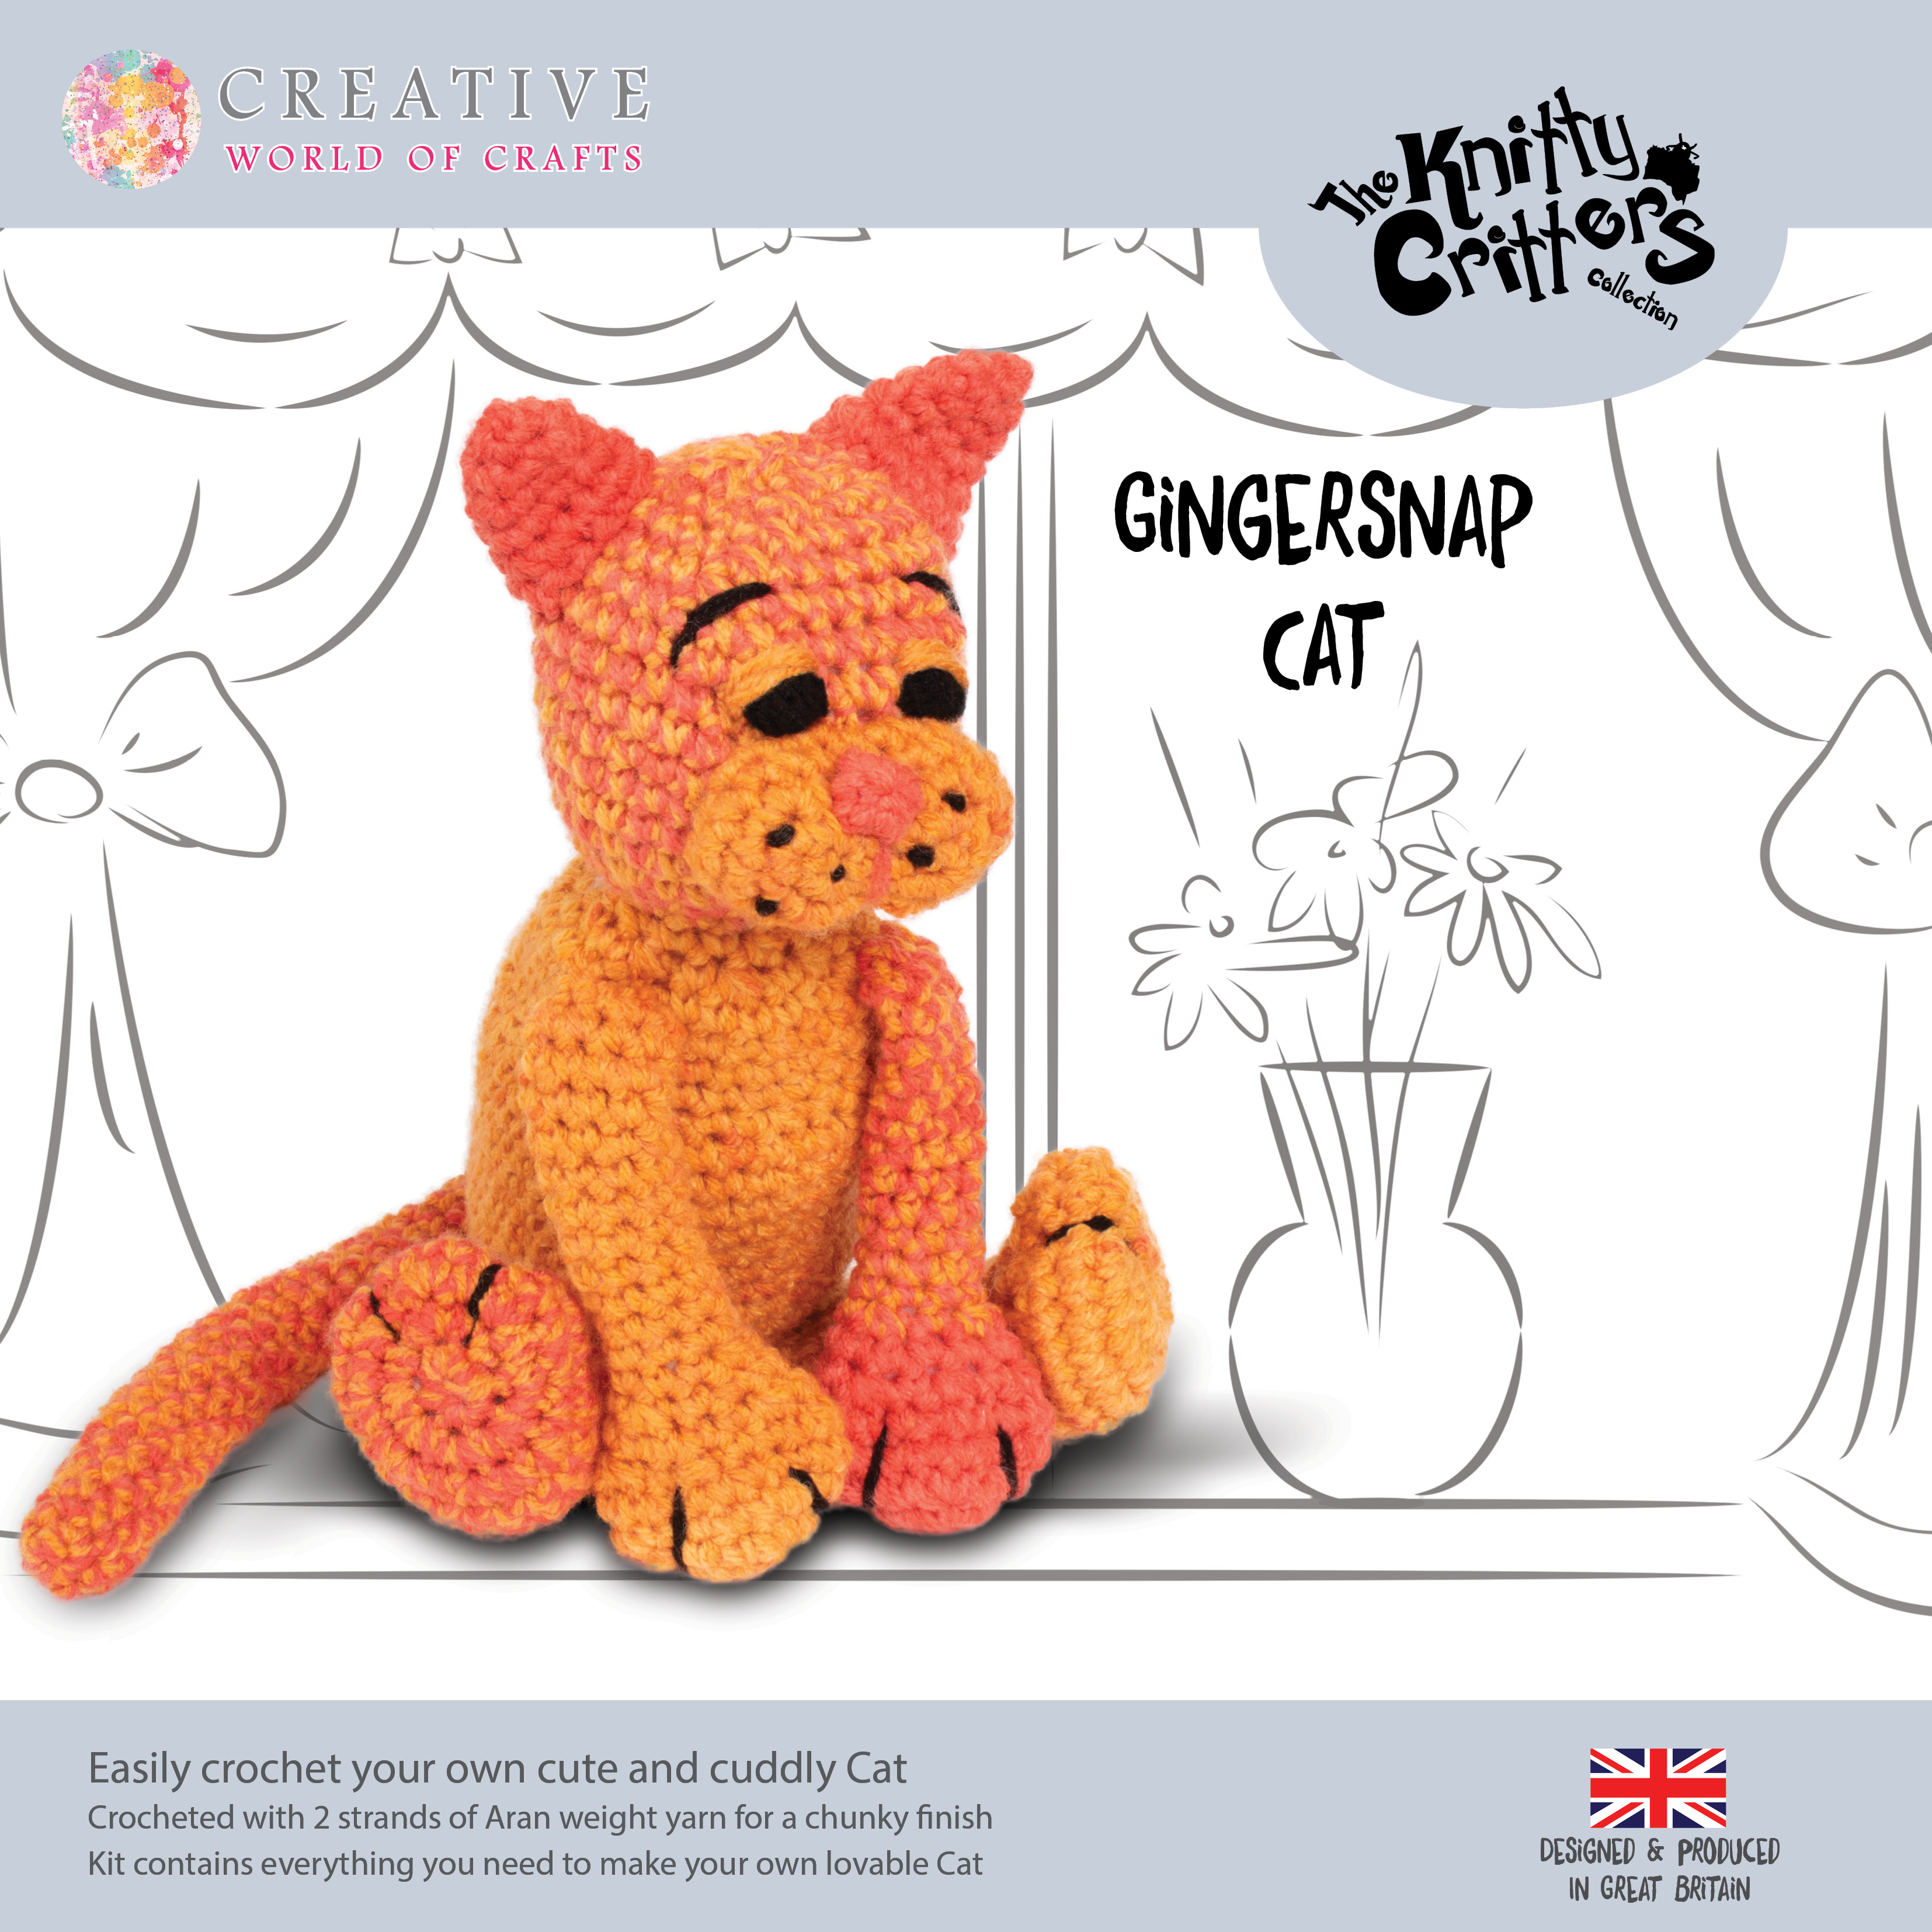 Knitty Critters - Cat - Gingersnap